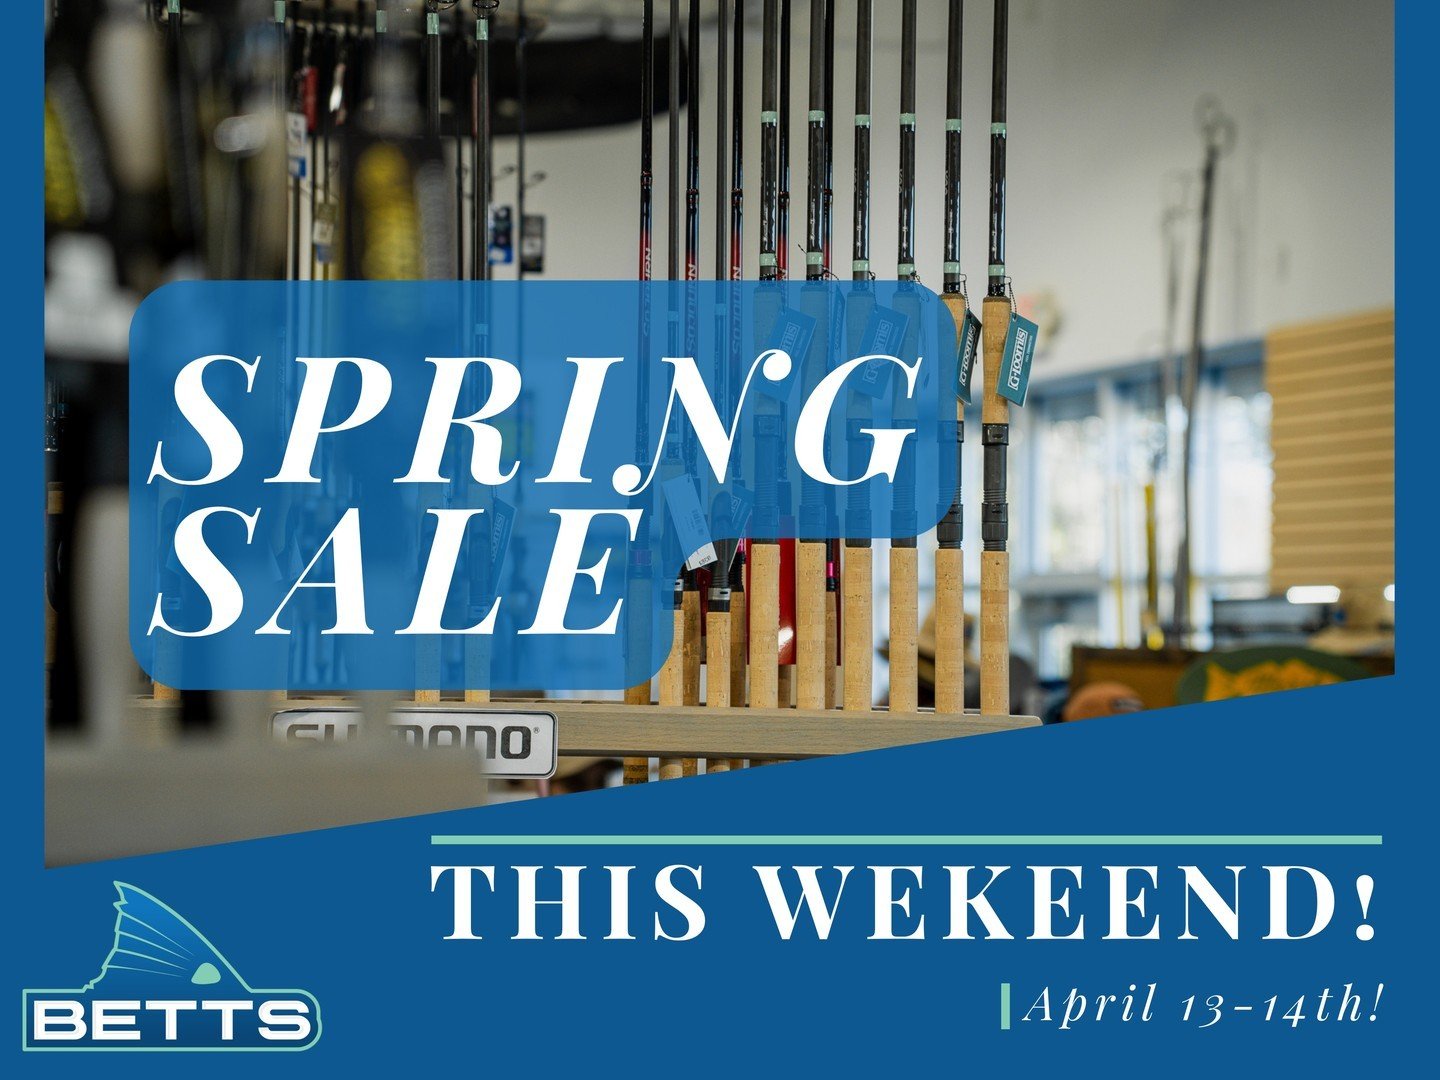 Tomorrow's the day you've been waiting for! Join us at Betts Fishing Center for one of our biggest sales of the year, where you can score incredible discounts on everything from tackle to sunglasses. Don't miss out on the chance to revamp your fishin